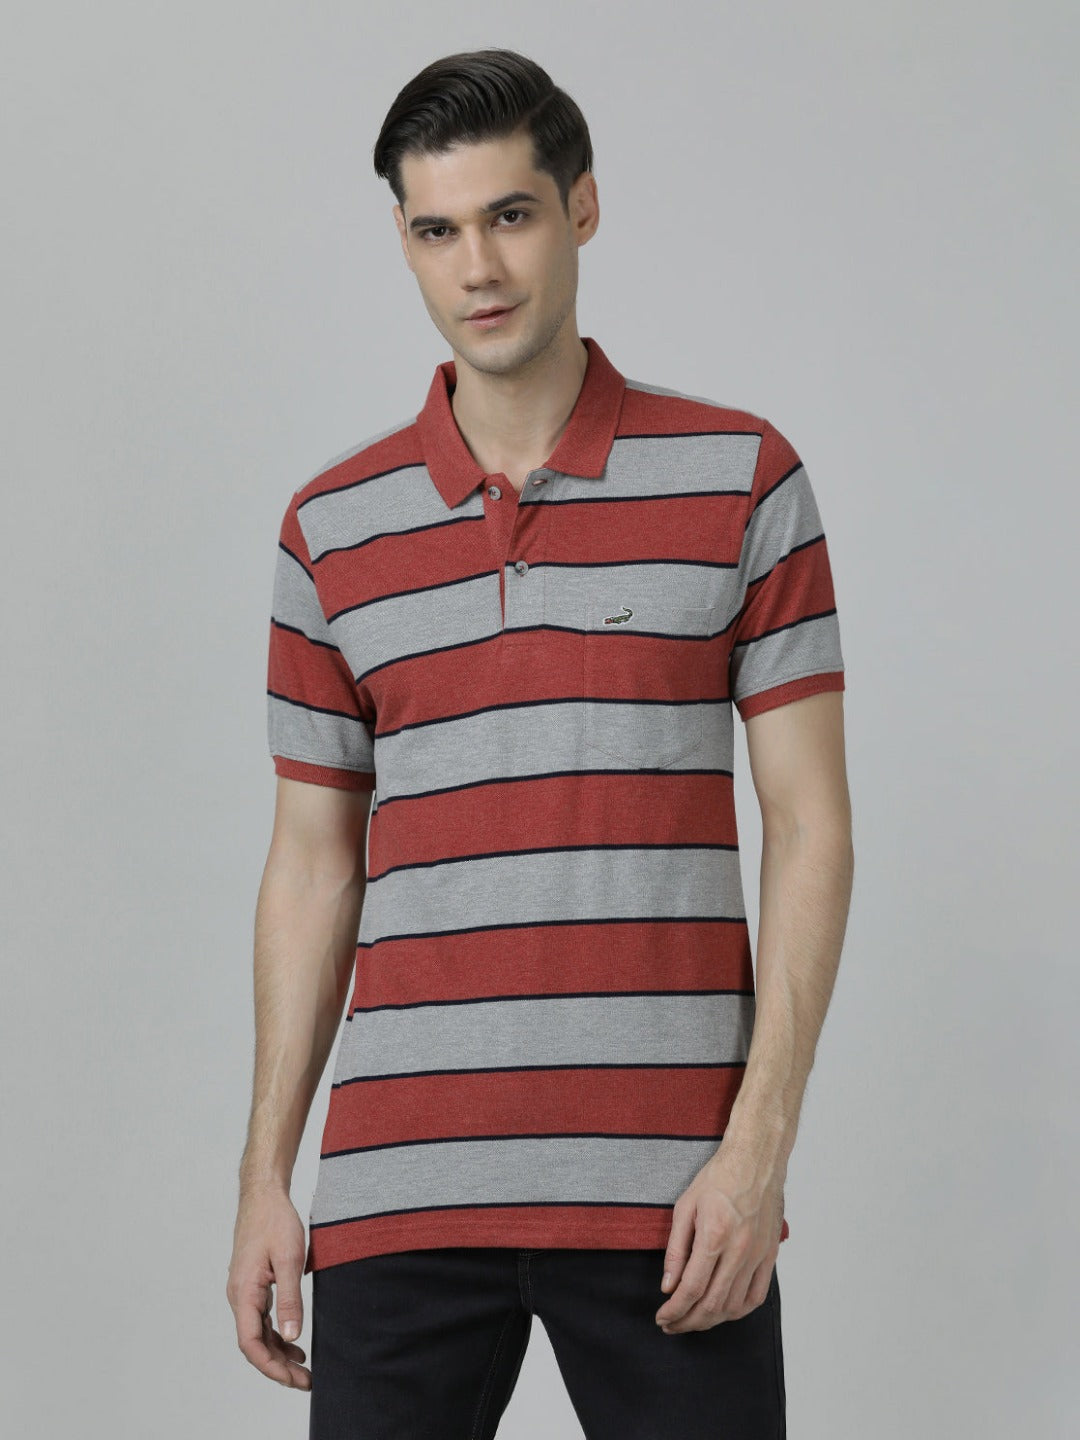 Casual Stripes Slim Fit Red Half Sleeve Polo T-shirt with Collar